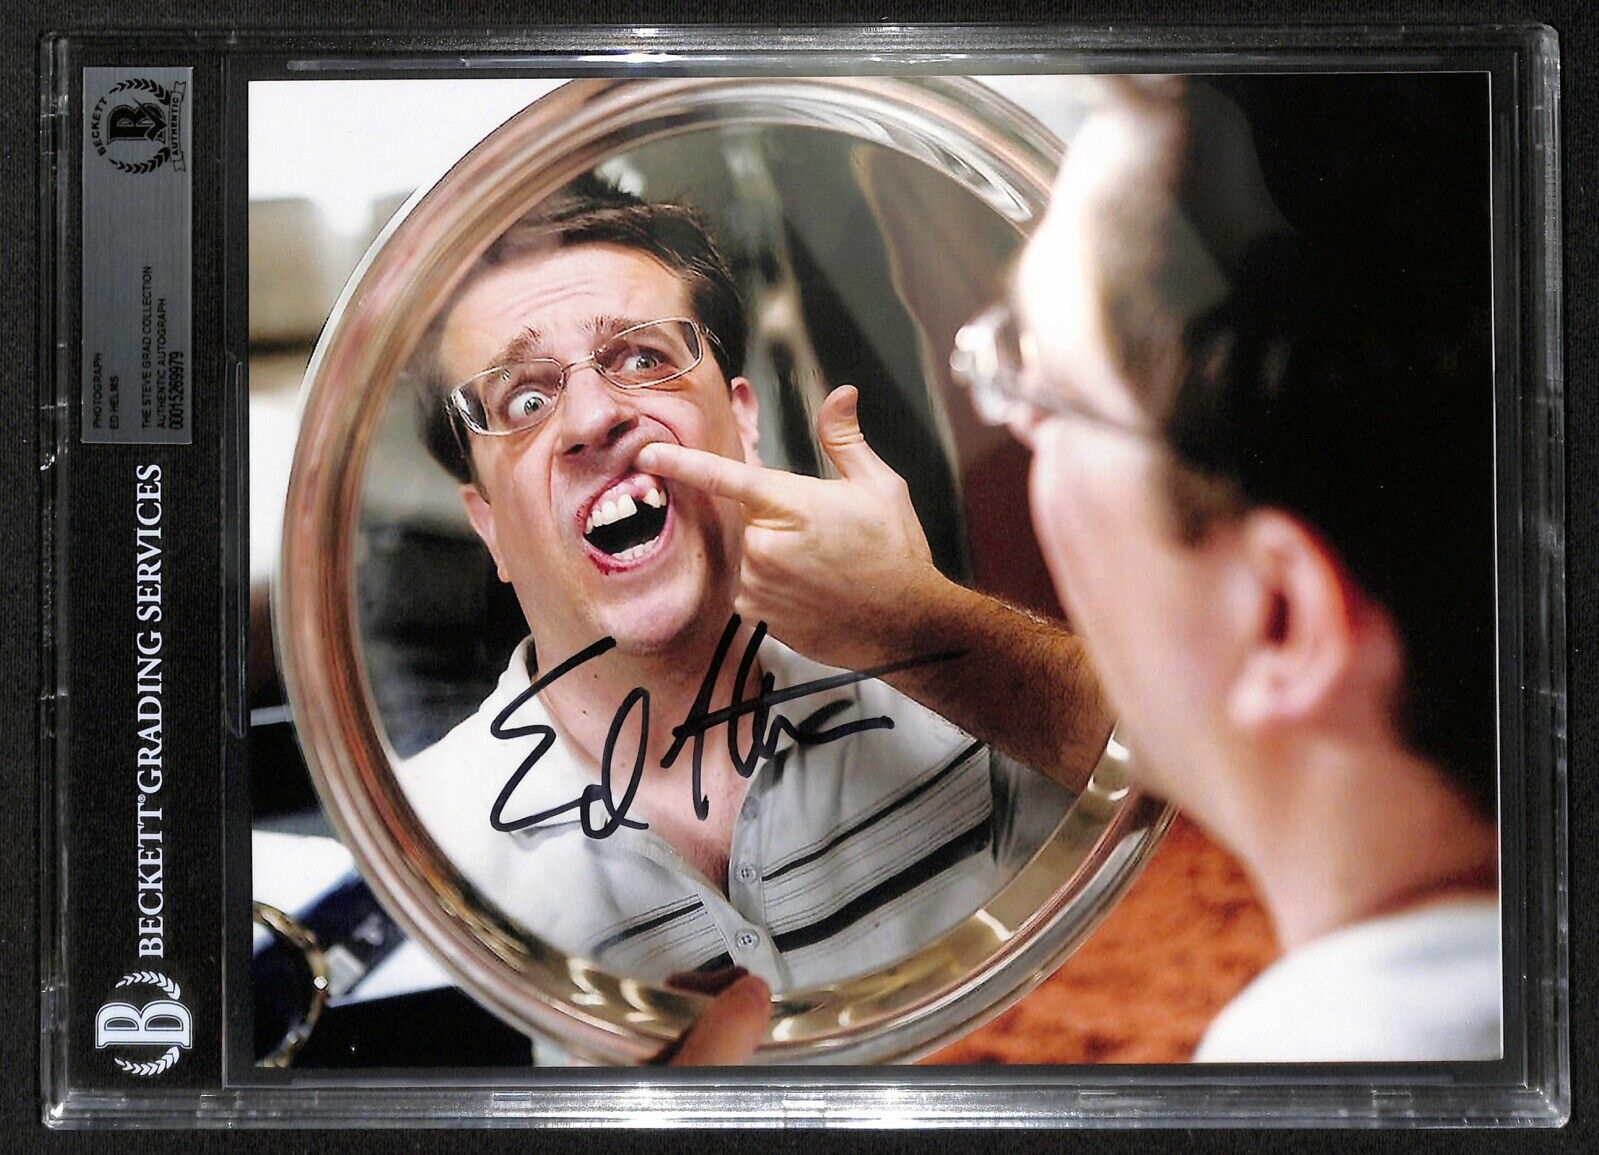 Ed Helms The Hangover Signed 8x10 Photograph BAS (Grad Collection)